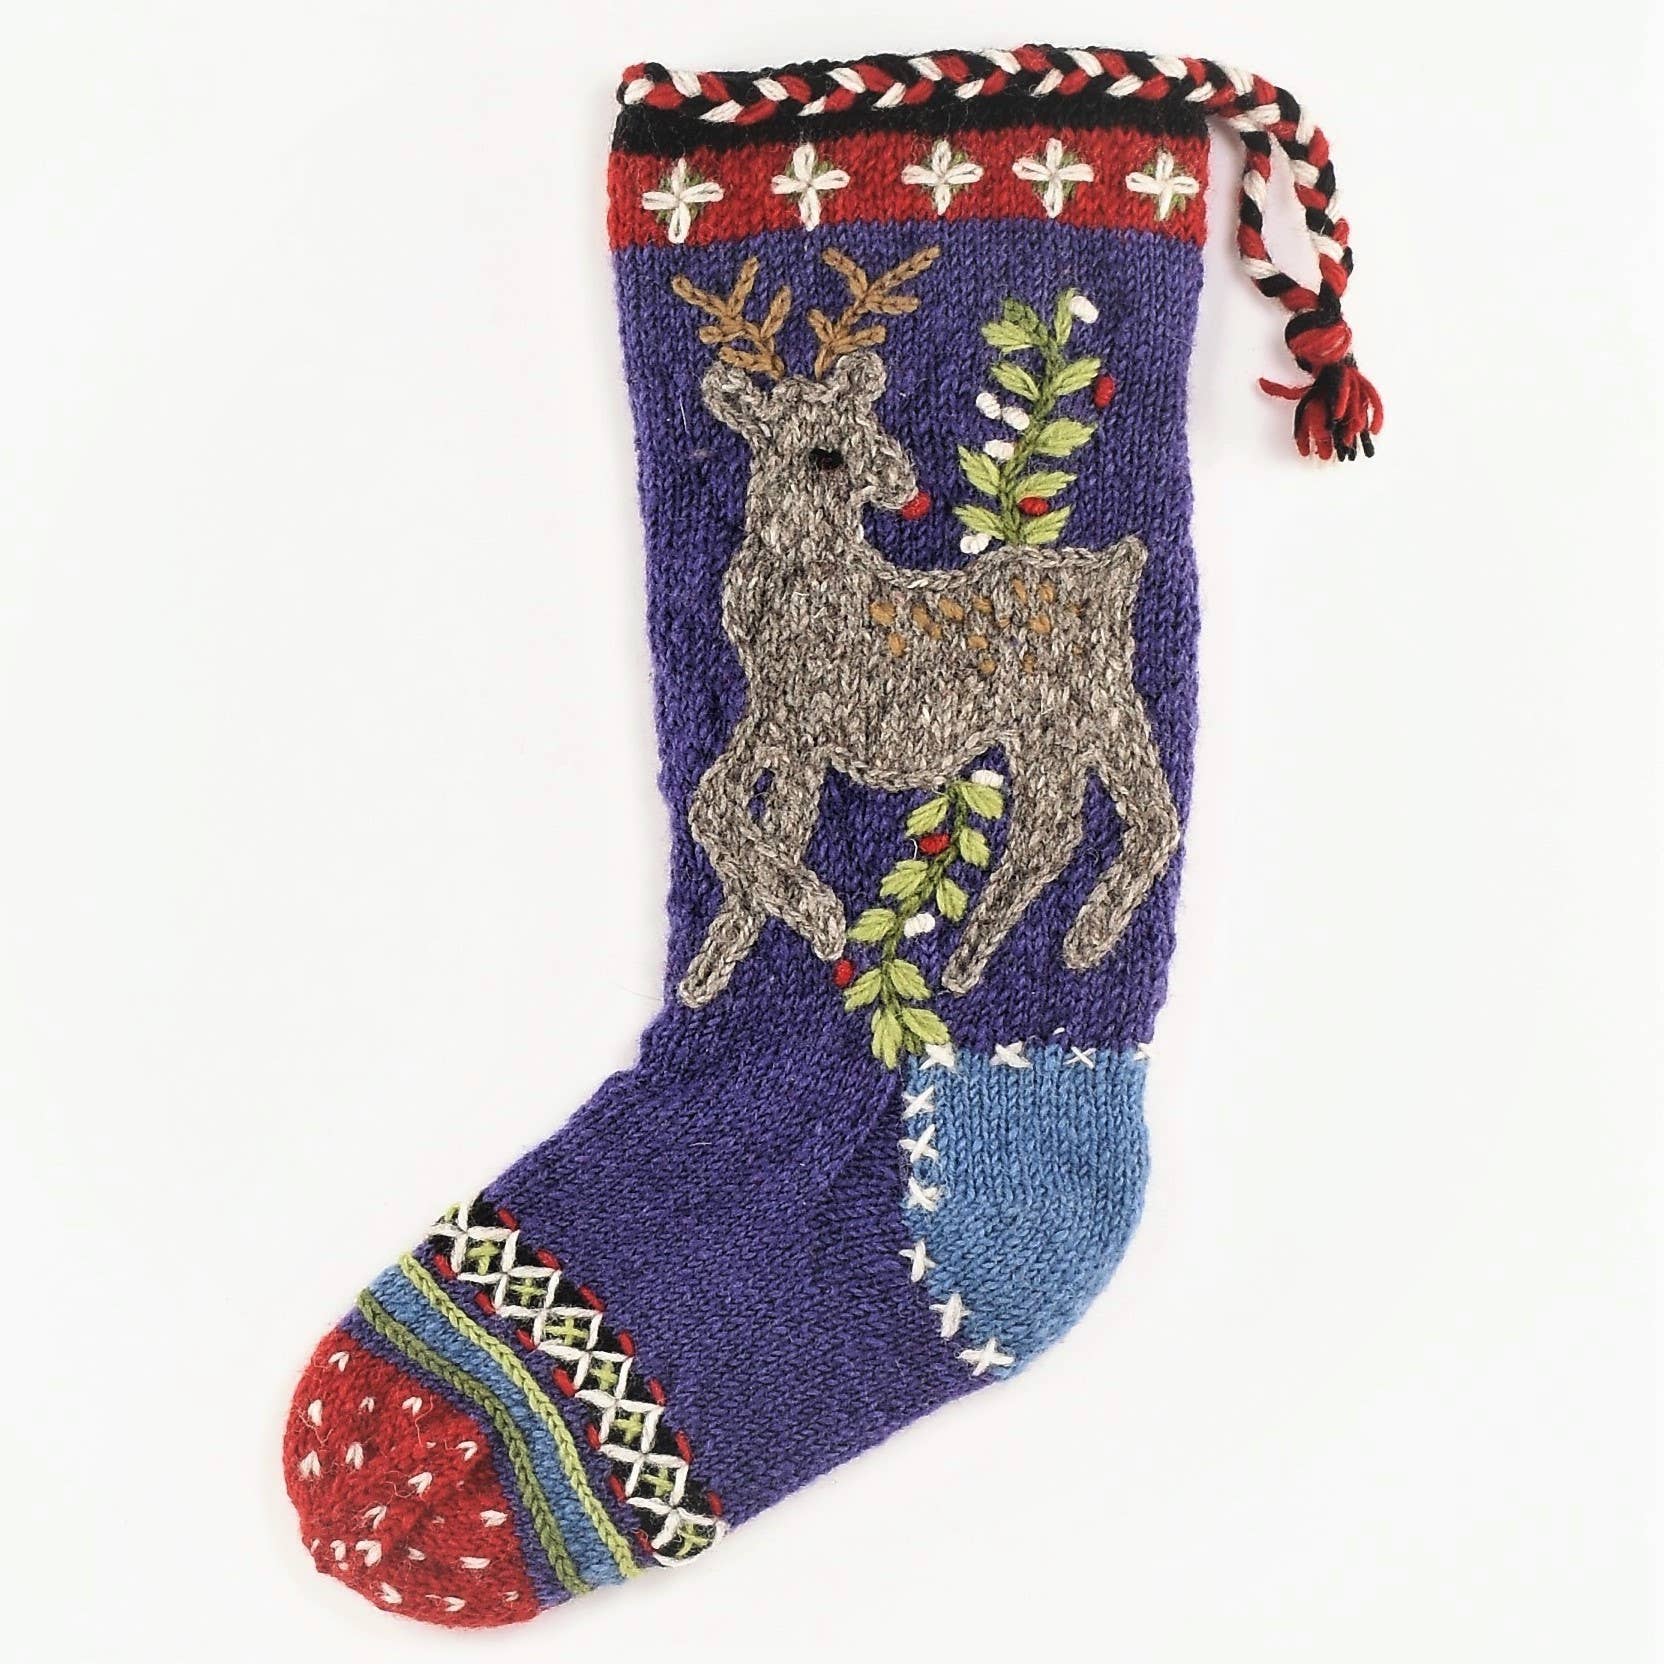 Knitted Wool Christmas Stocking - Rudolph